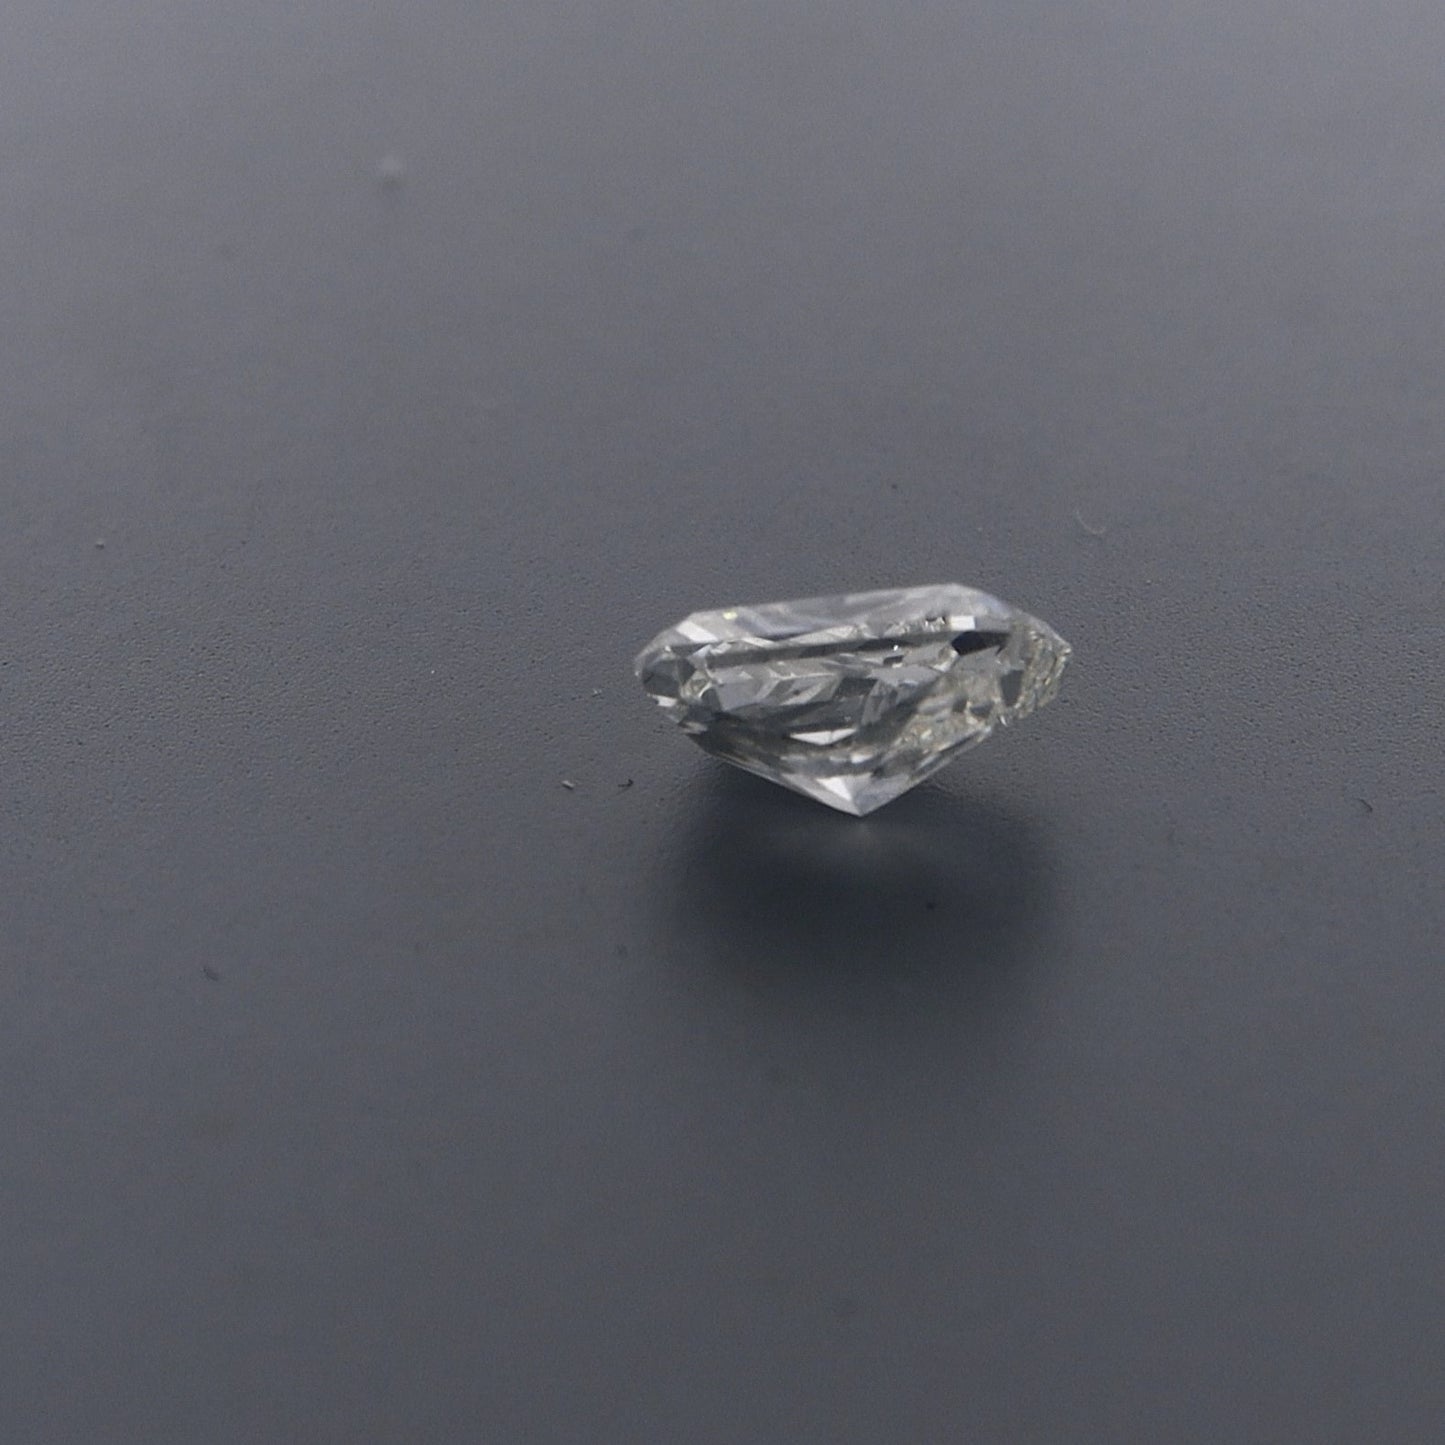 Radiant 1.30ct JVS2 Diamond with GIA Certification